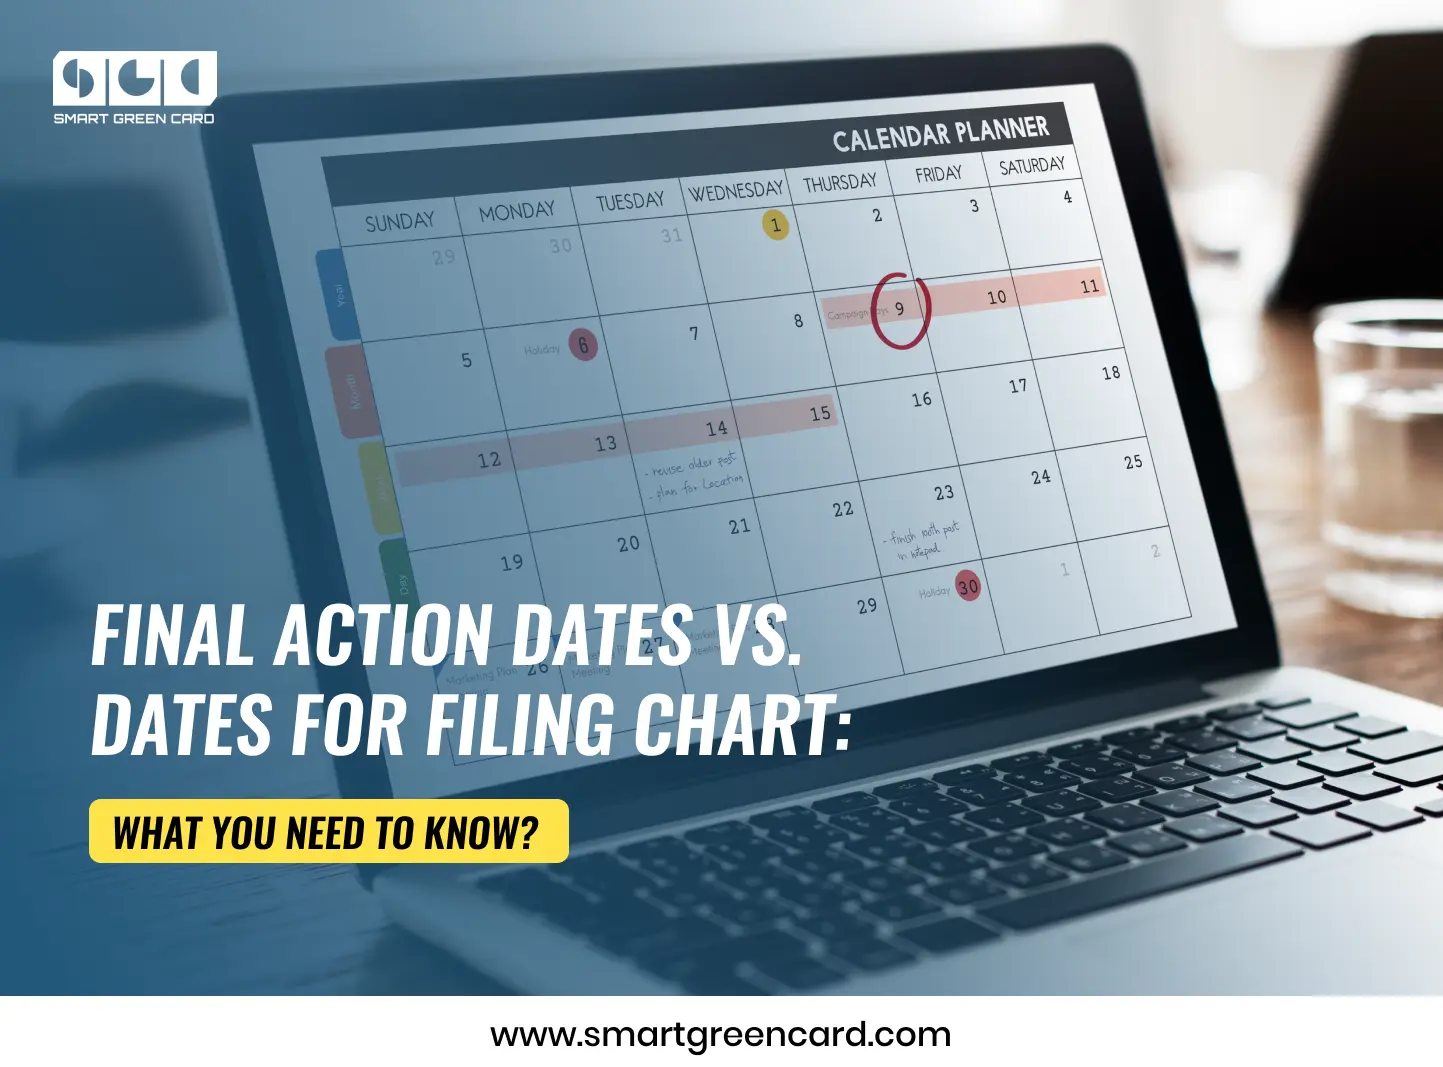 Final Action Dates vs Dates for Filing Chart